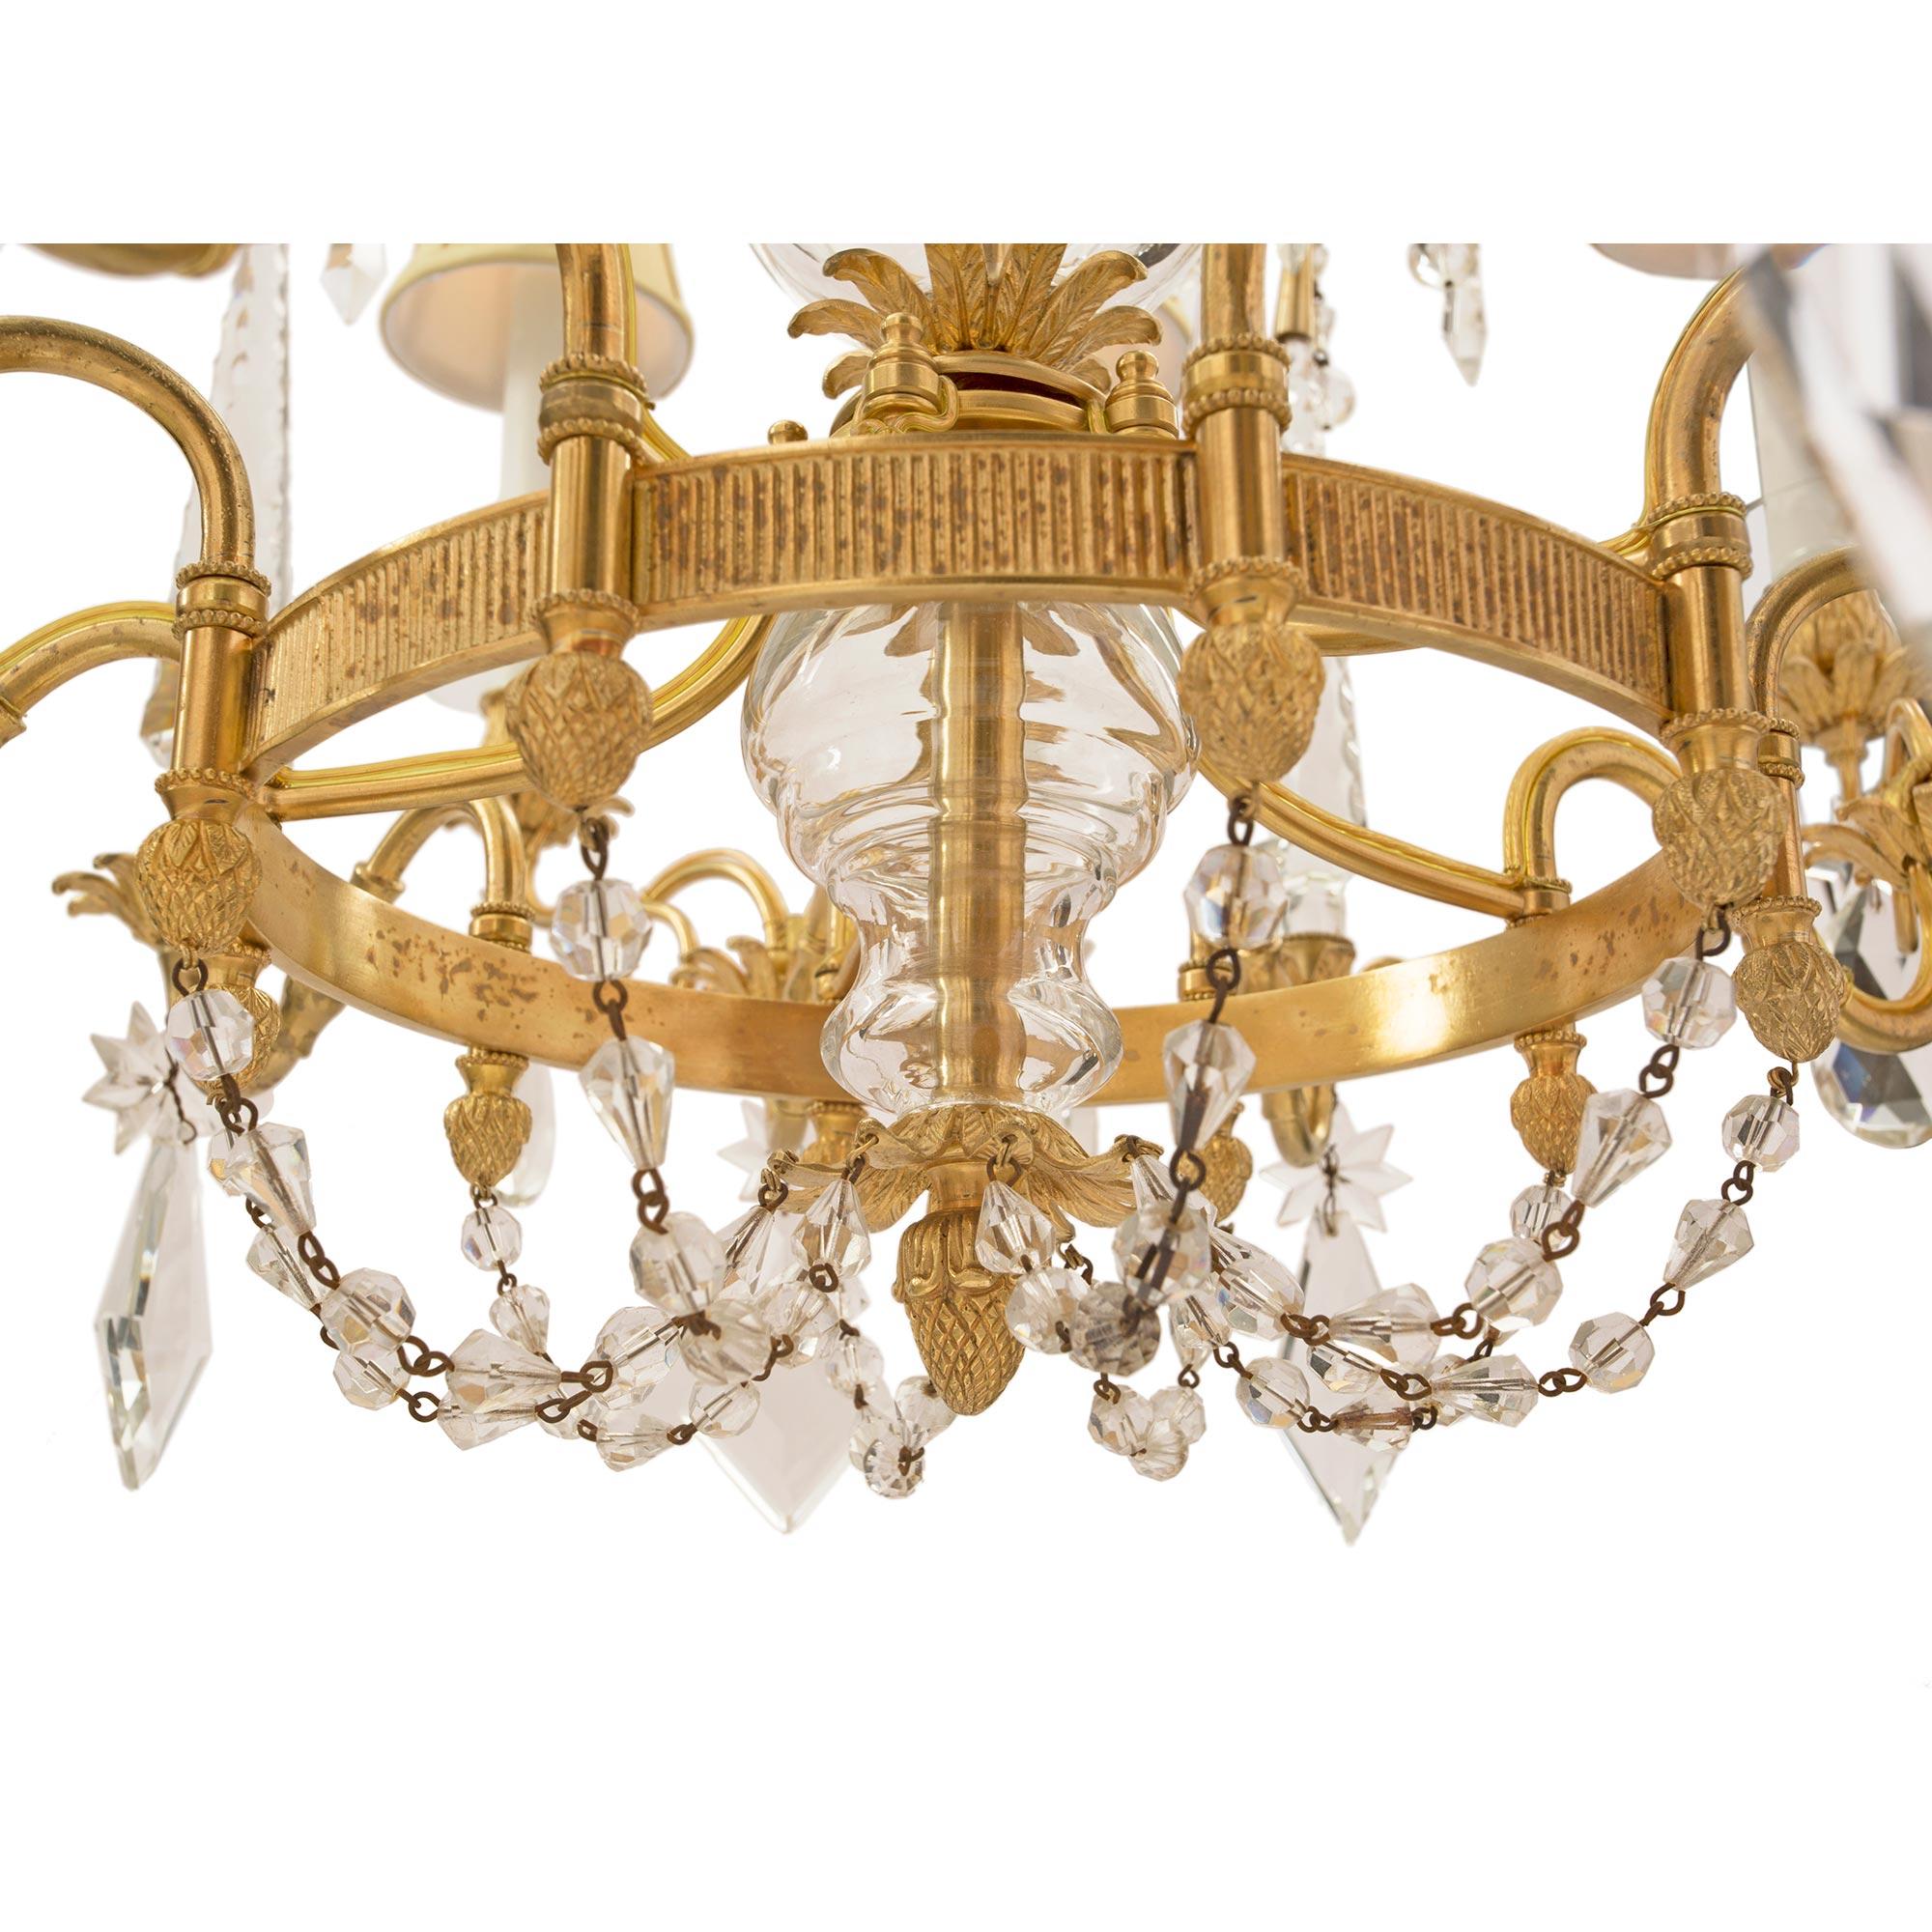 Russian 19th Century Neoclassical Style Ormolu and Crystal Chandelier For Sale 3